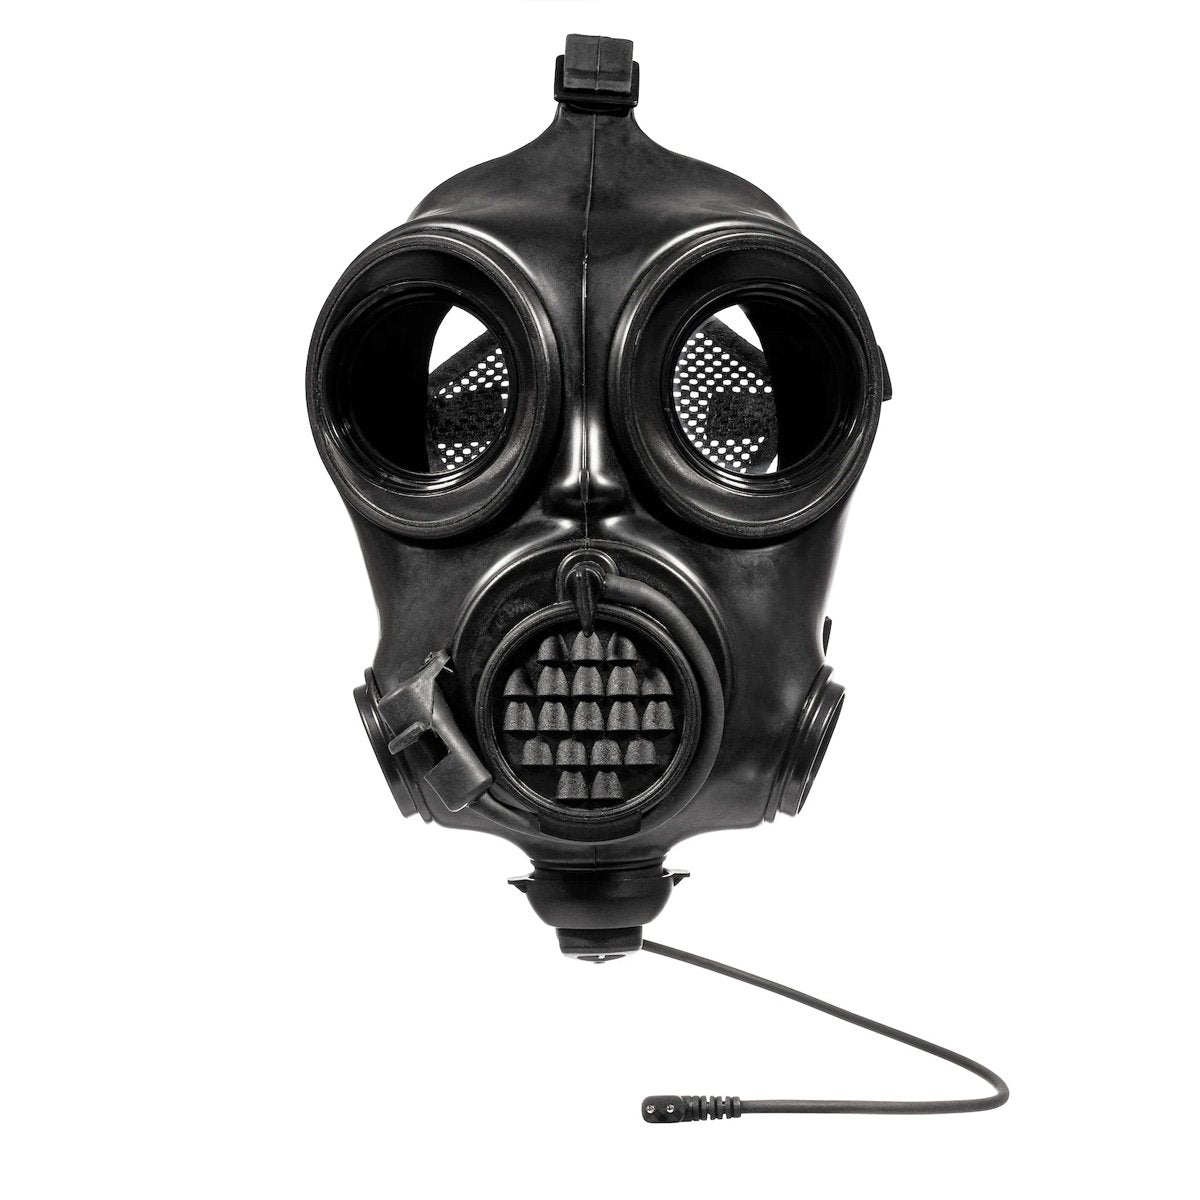 MIRA Safety Gas Mask Microphone Comms Kit CM-6M, CM-7M, CM-8M, & TAPR Gas Mask Essentials MIRA Safety Tactical Gear Supplier Tactical Distributors Australia